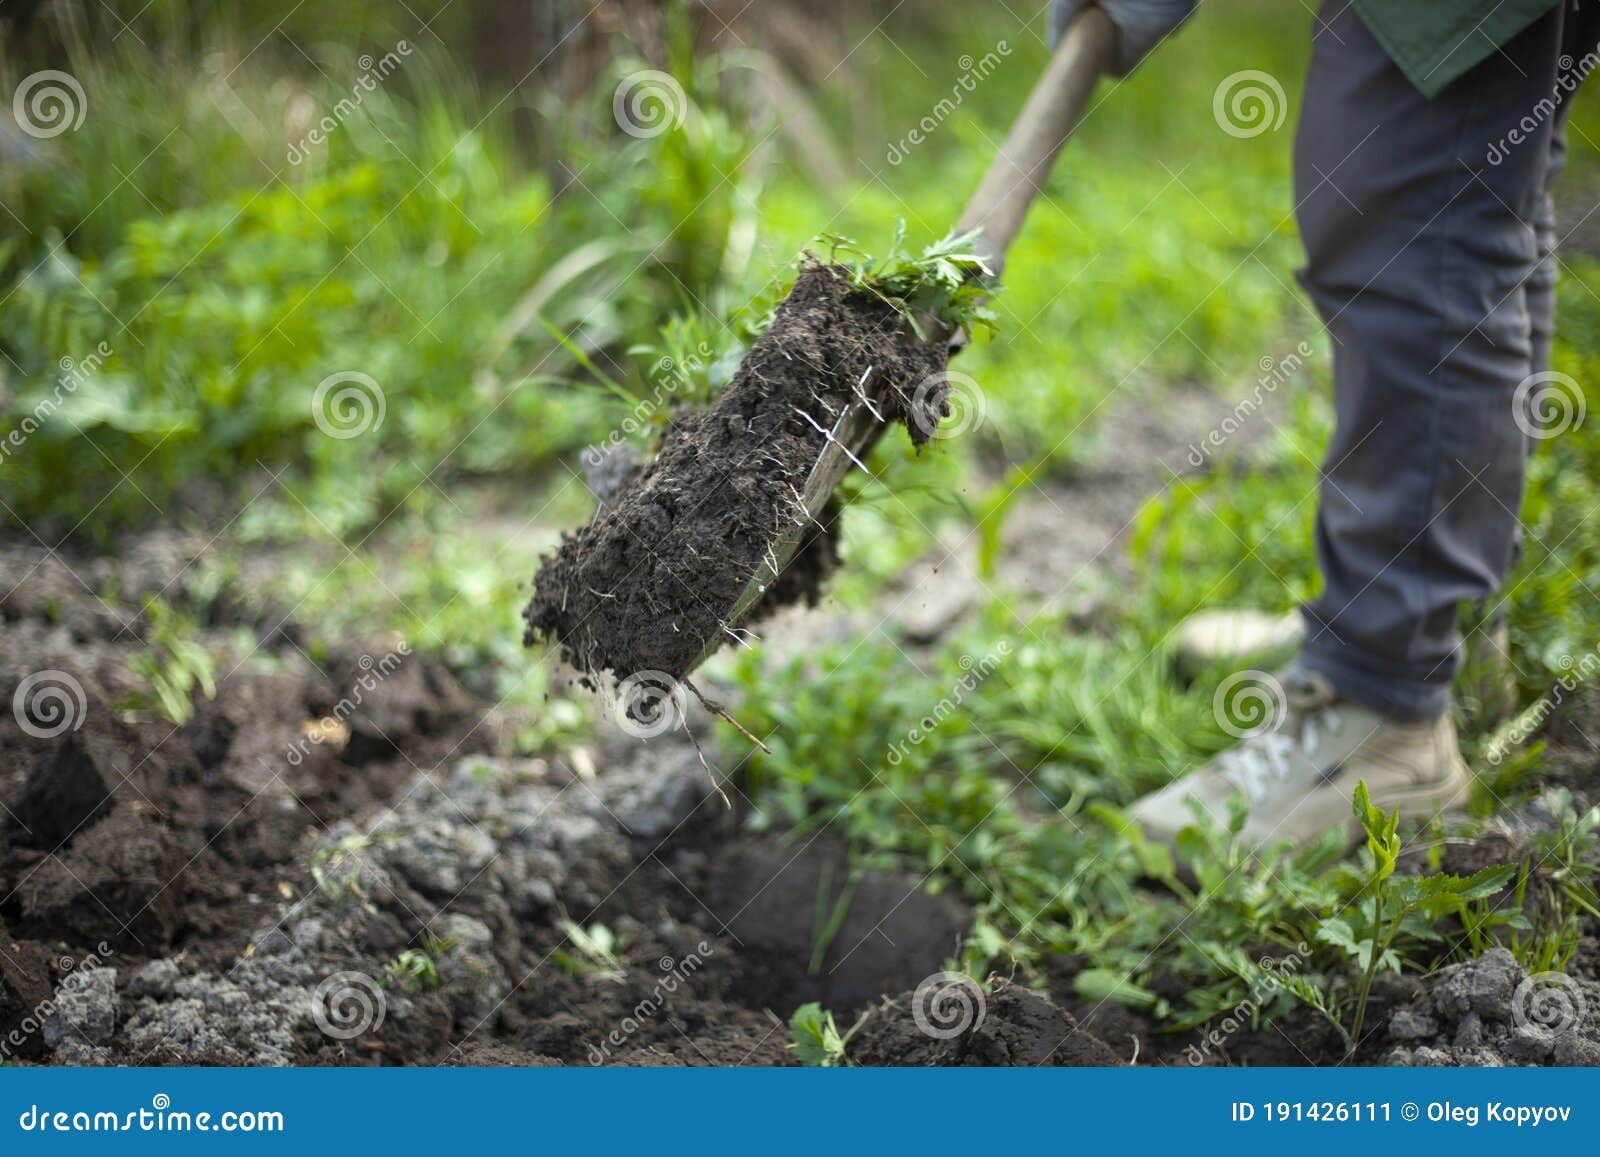 Digging Up Soil with a Shovel. Stock Image - Image of action, tool ...